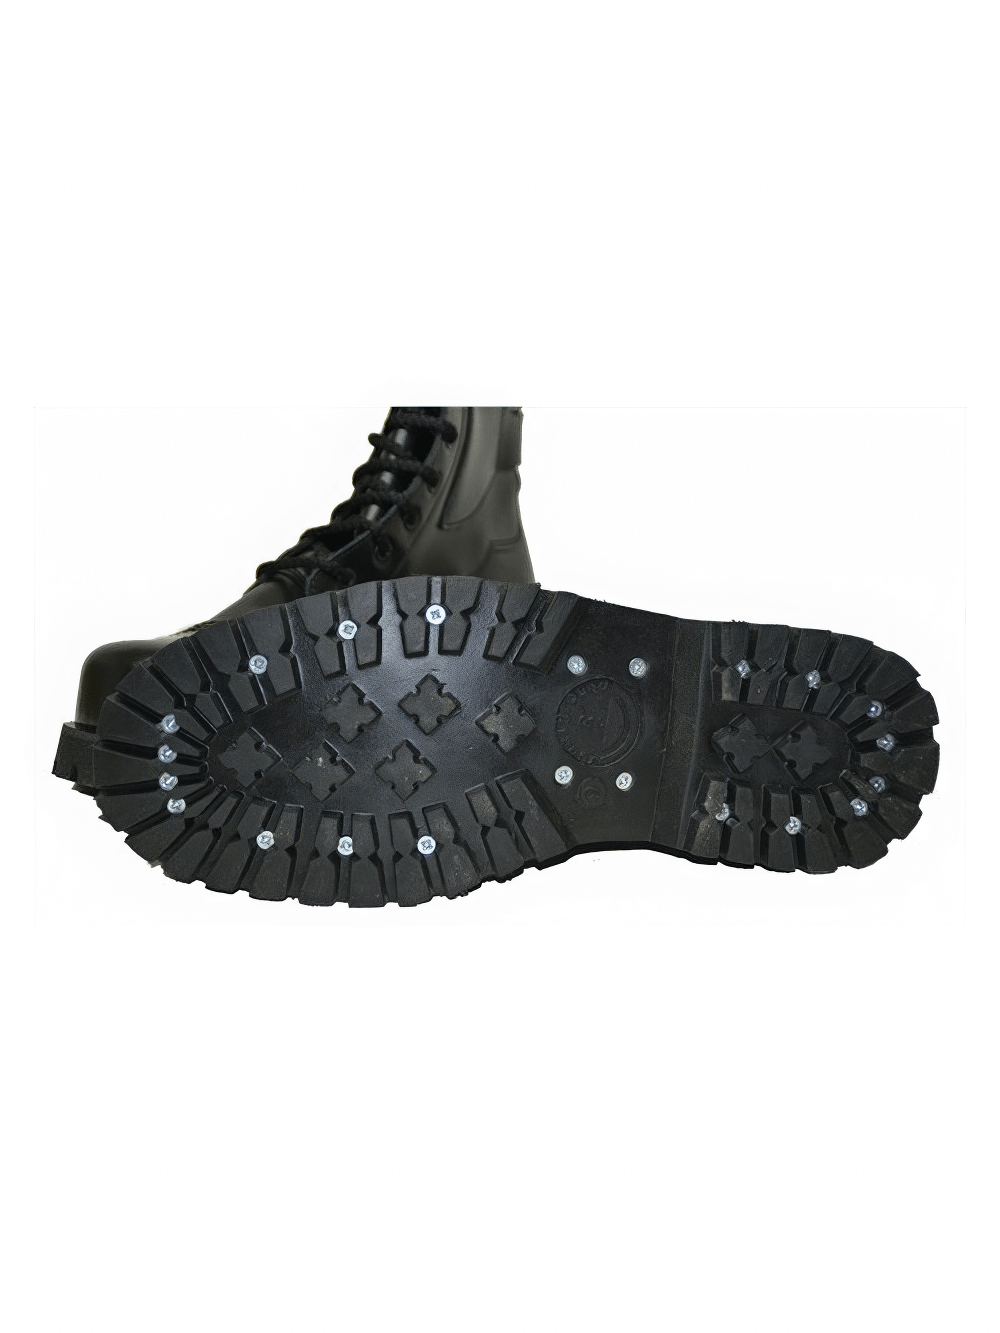 20-Eyelet Black Rangers Boots with Steel Toe Cap